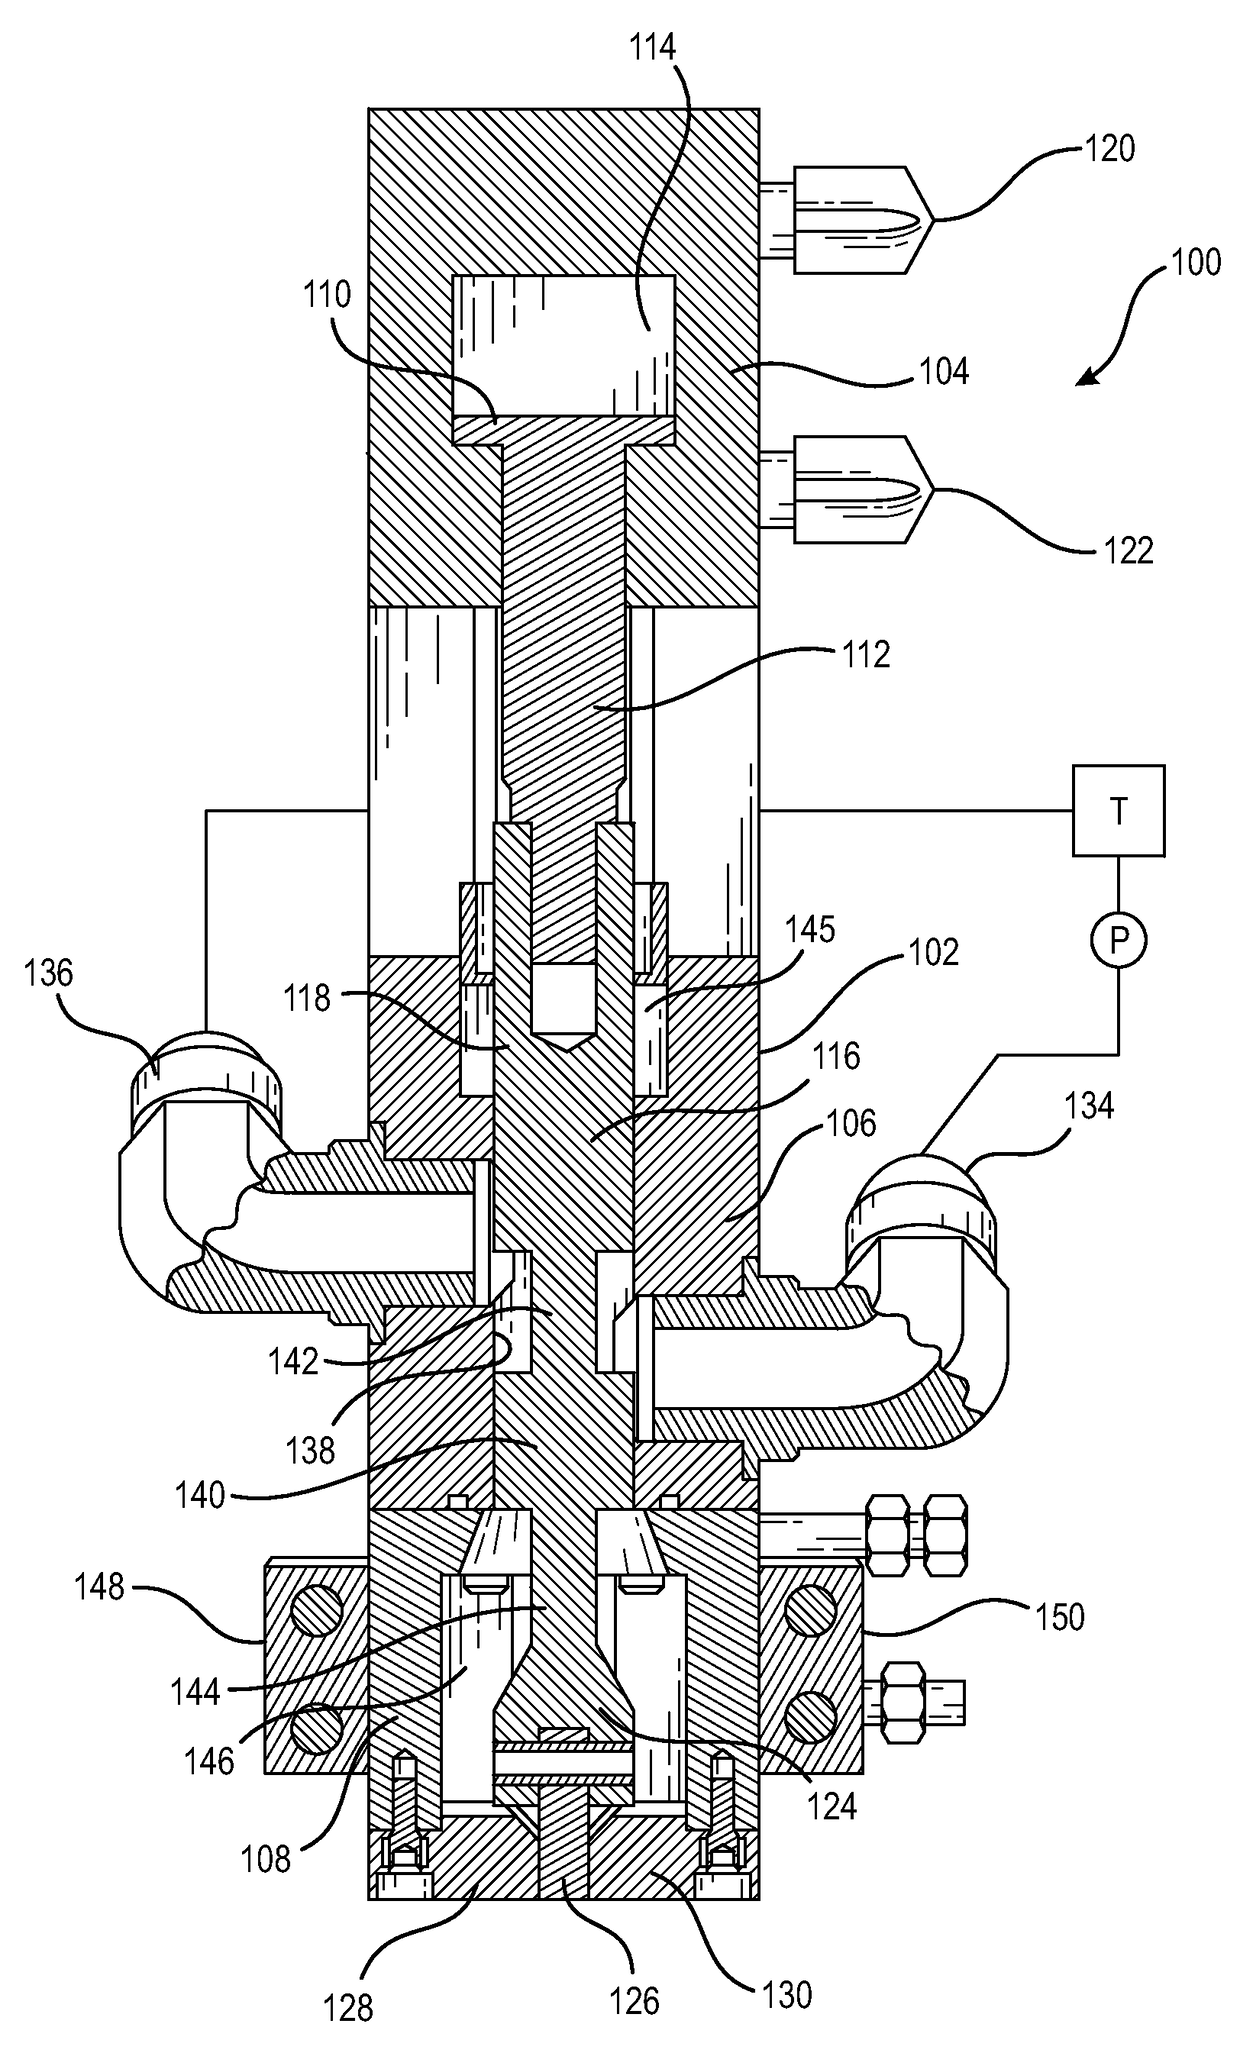 Plunger-type dispensing valve for the rapid deposition of adhesive to road pavement surfaces for enabling the fixation of pavement markers to road pavement surfaces